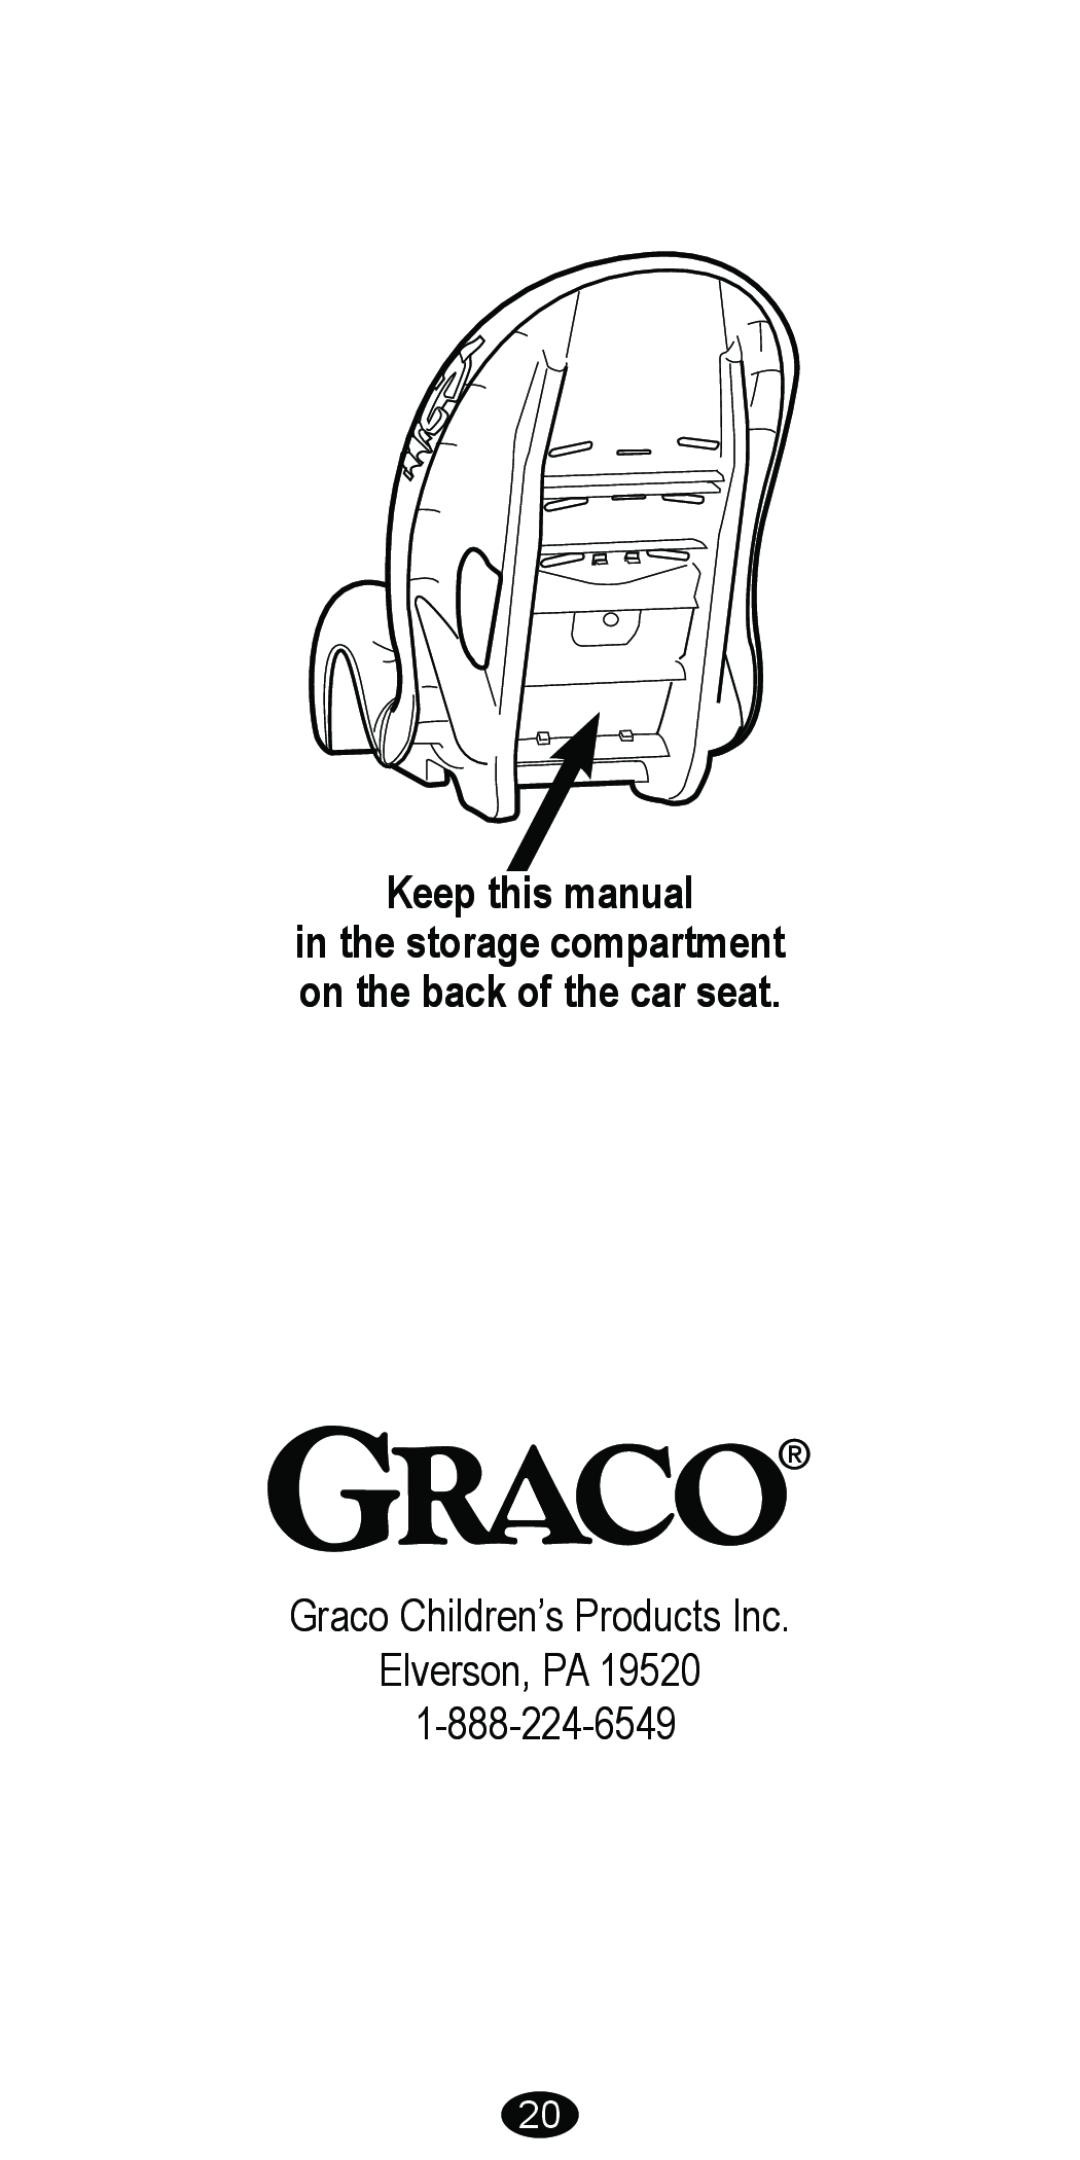 Graco 8481 owner manual Keep this manual, in the storage compartment on the back of the car seat 